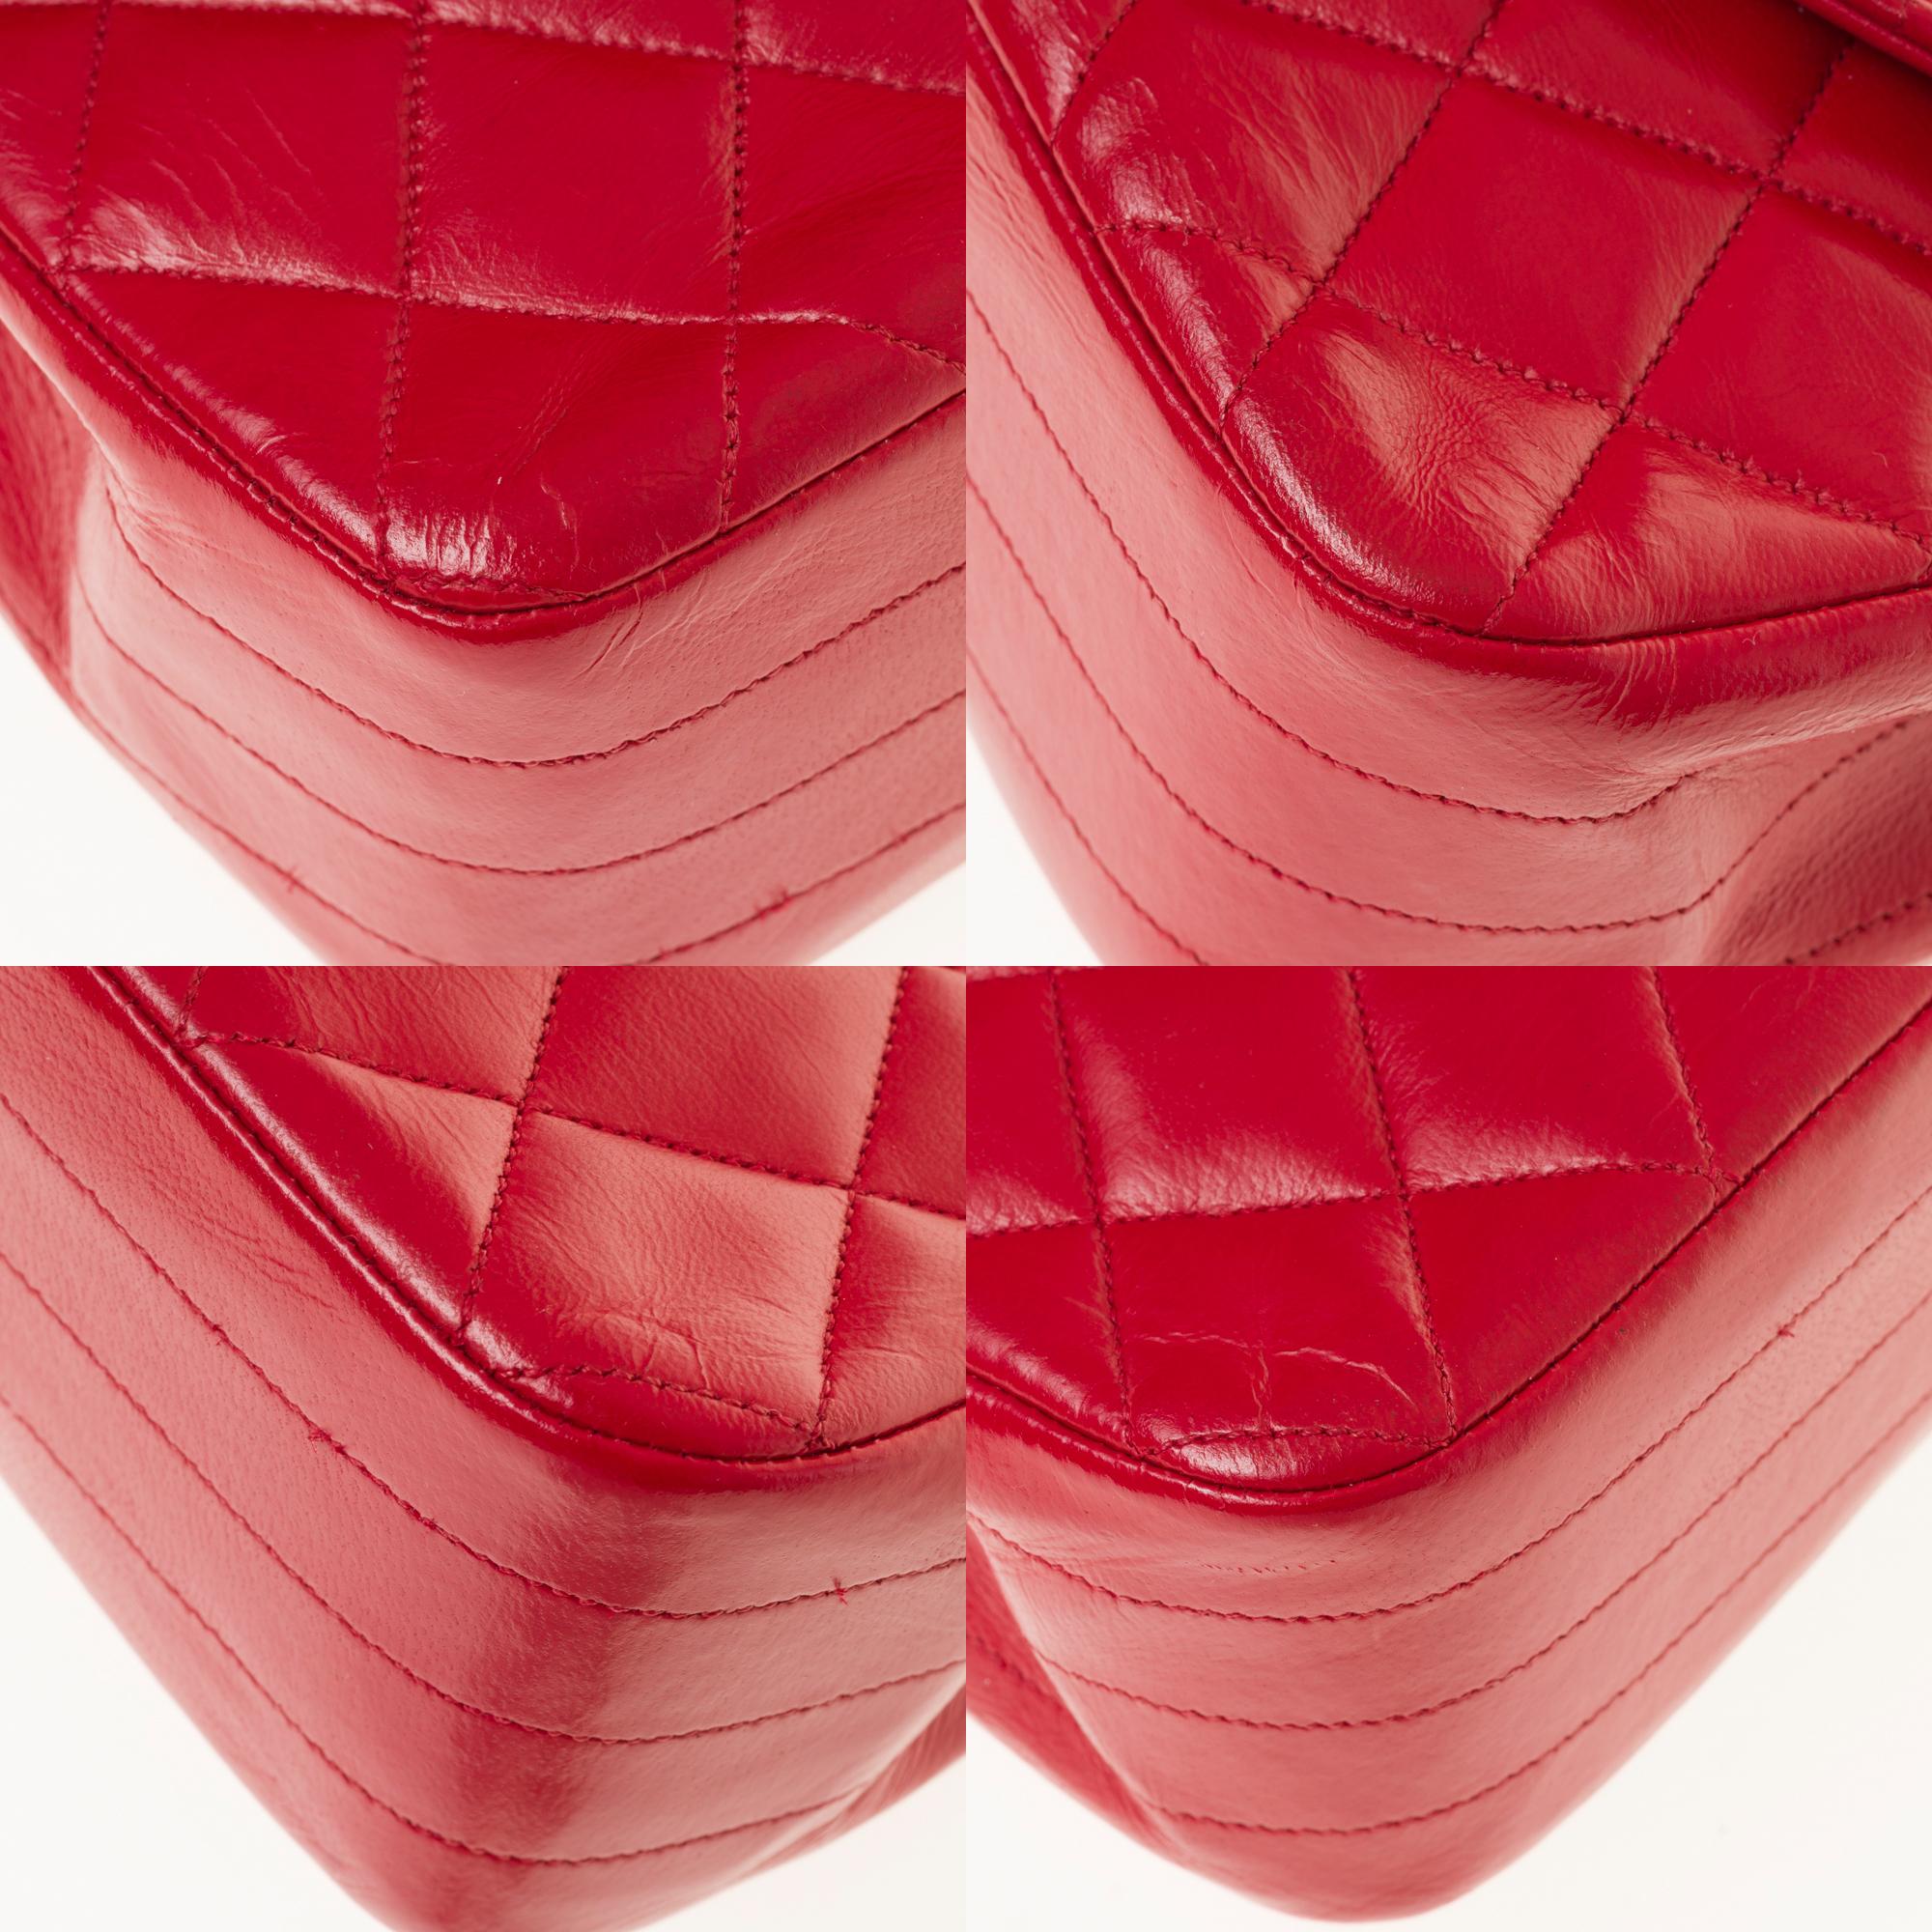 Chanel Classic Flap shoulder bag in Red quilted lambskin, GHW 3